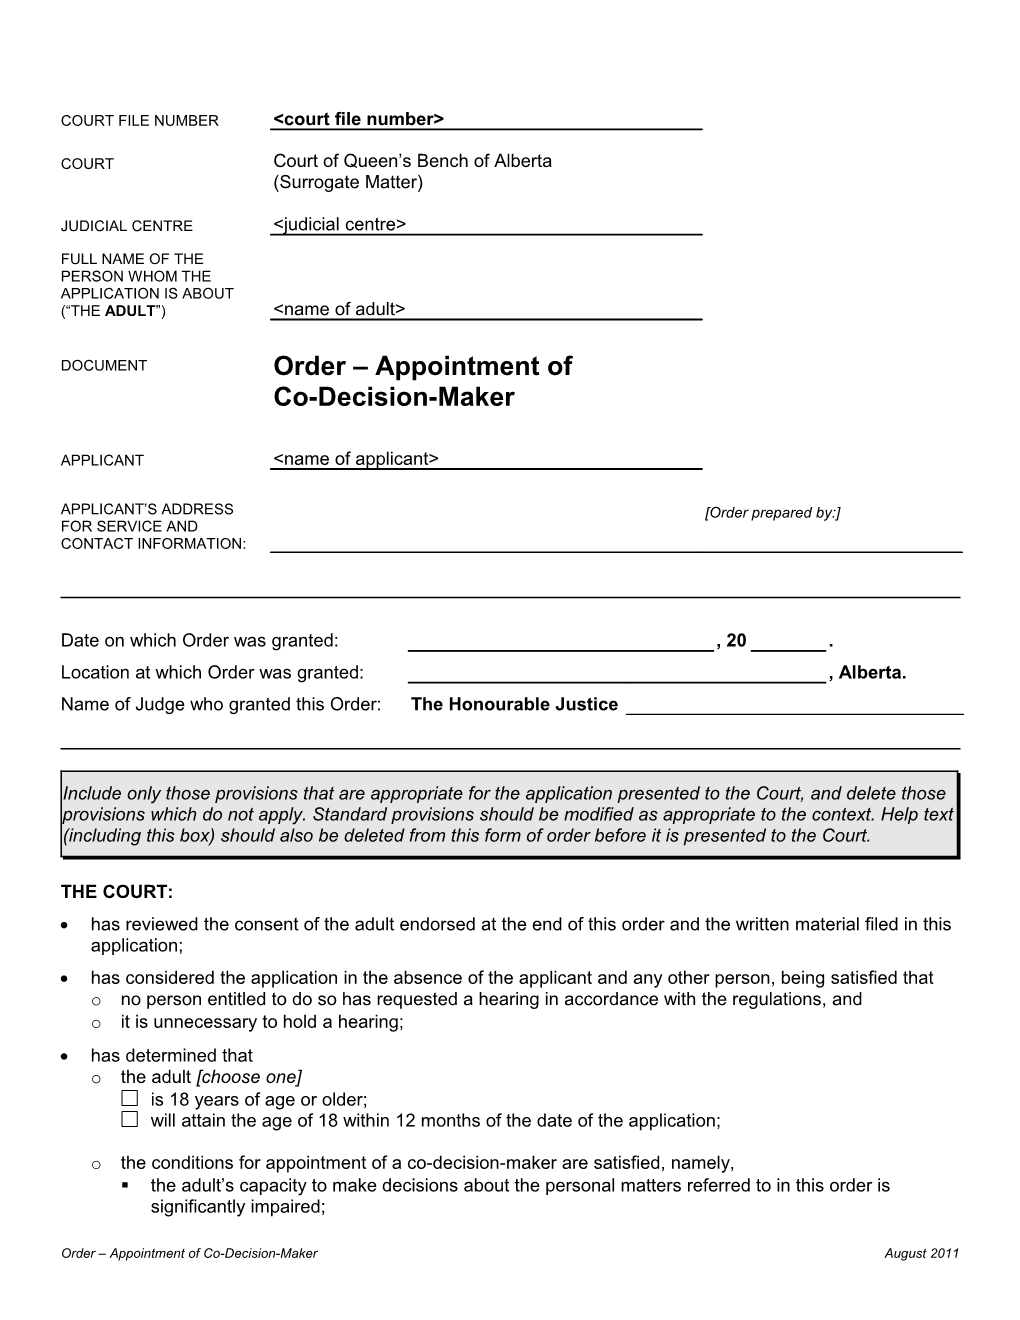 FORM 05- Order Appointment of Co-Decision Maker